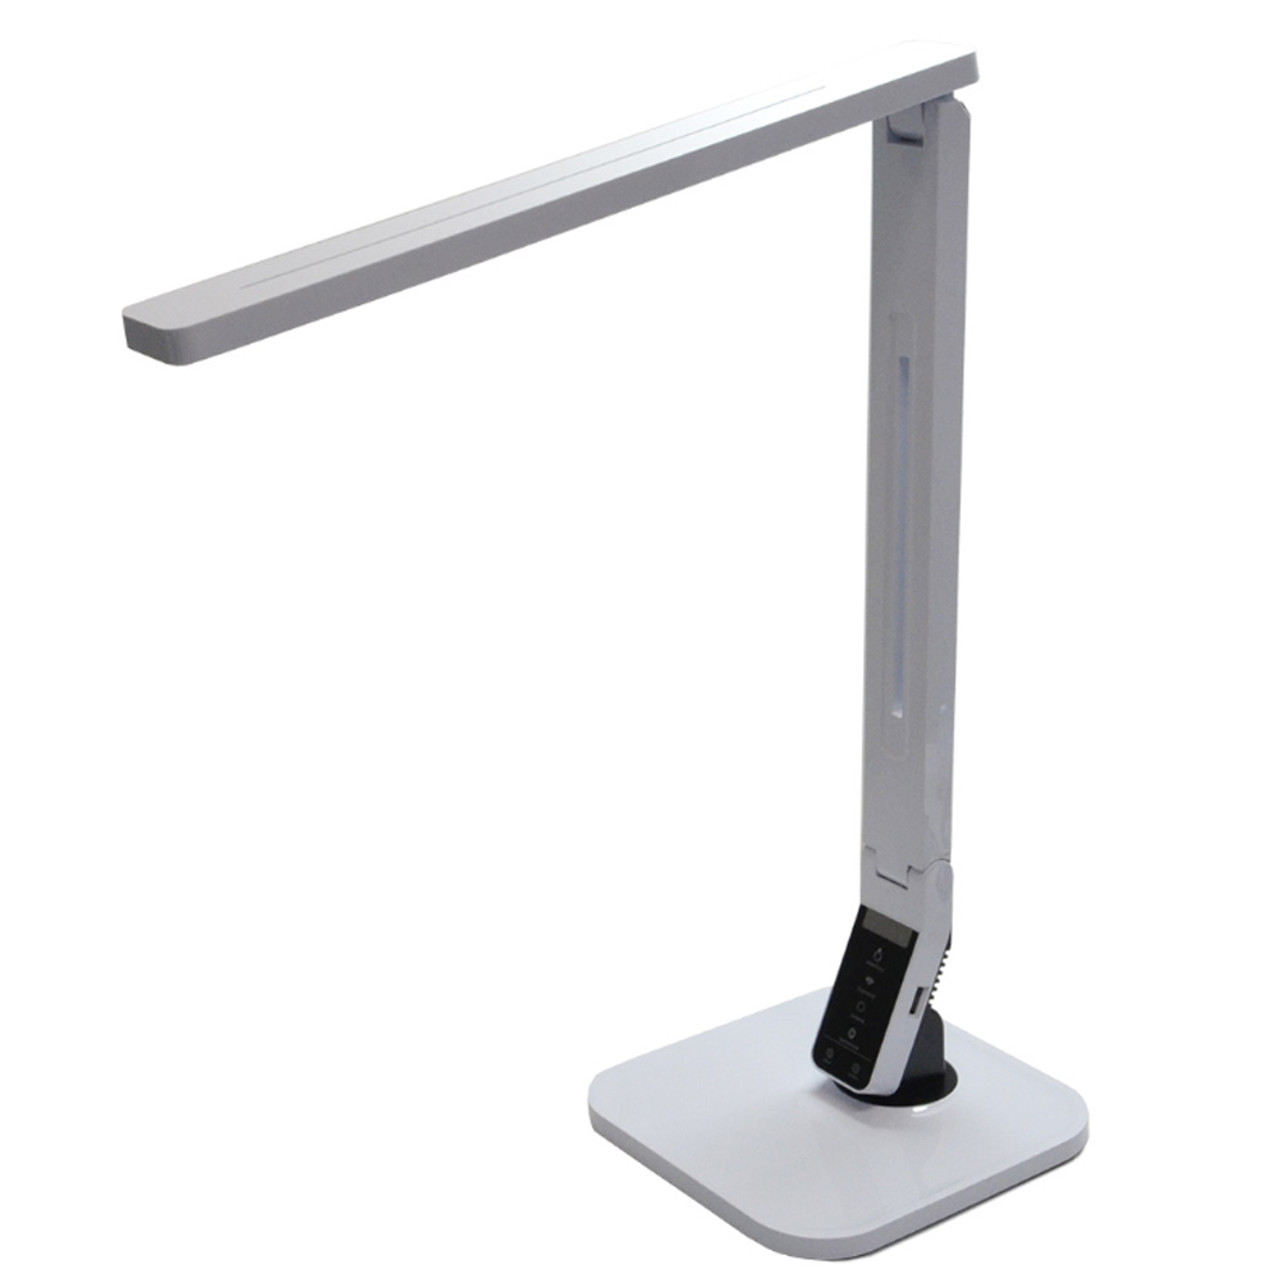 Grobet USA LED Bench Lamp with 1.75x Magnifier Clearance | Esslinger